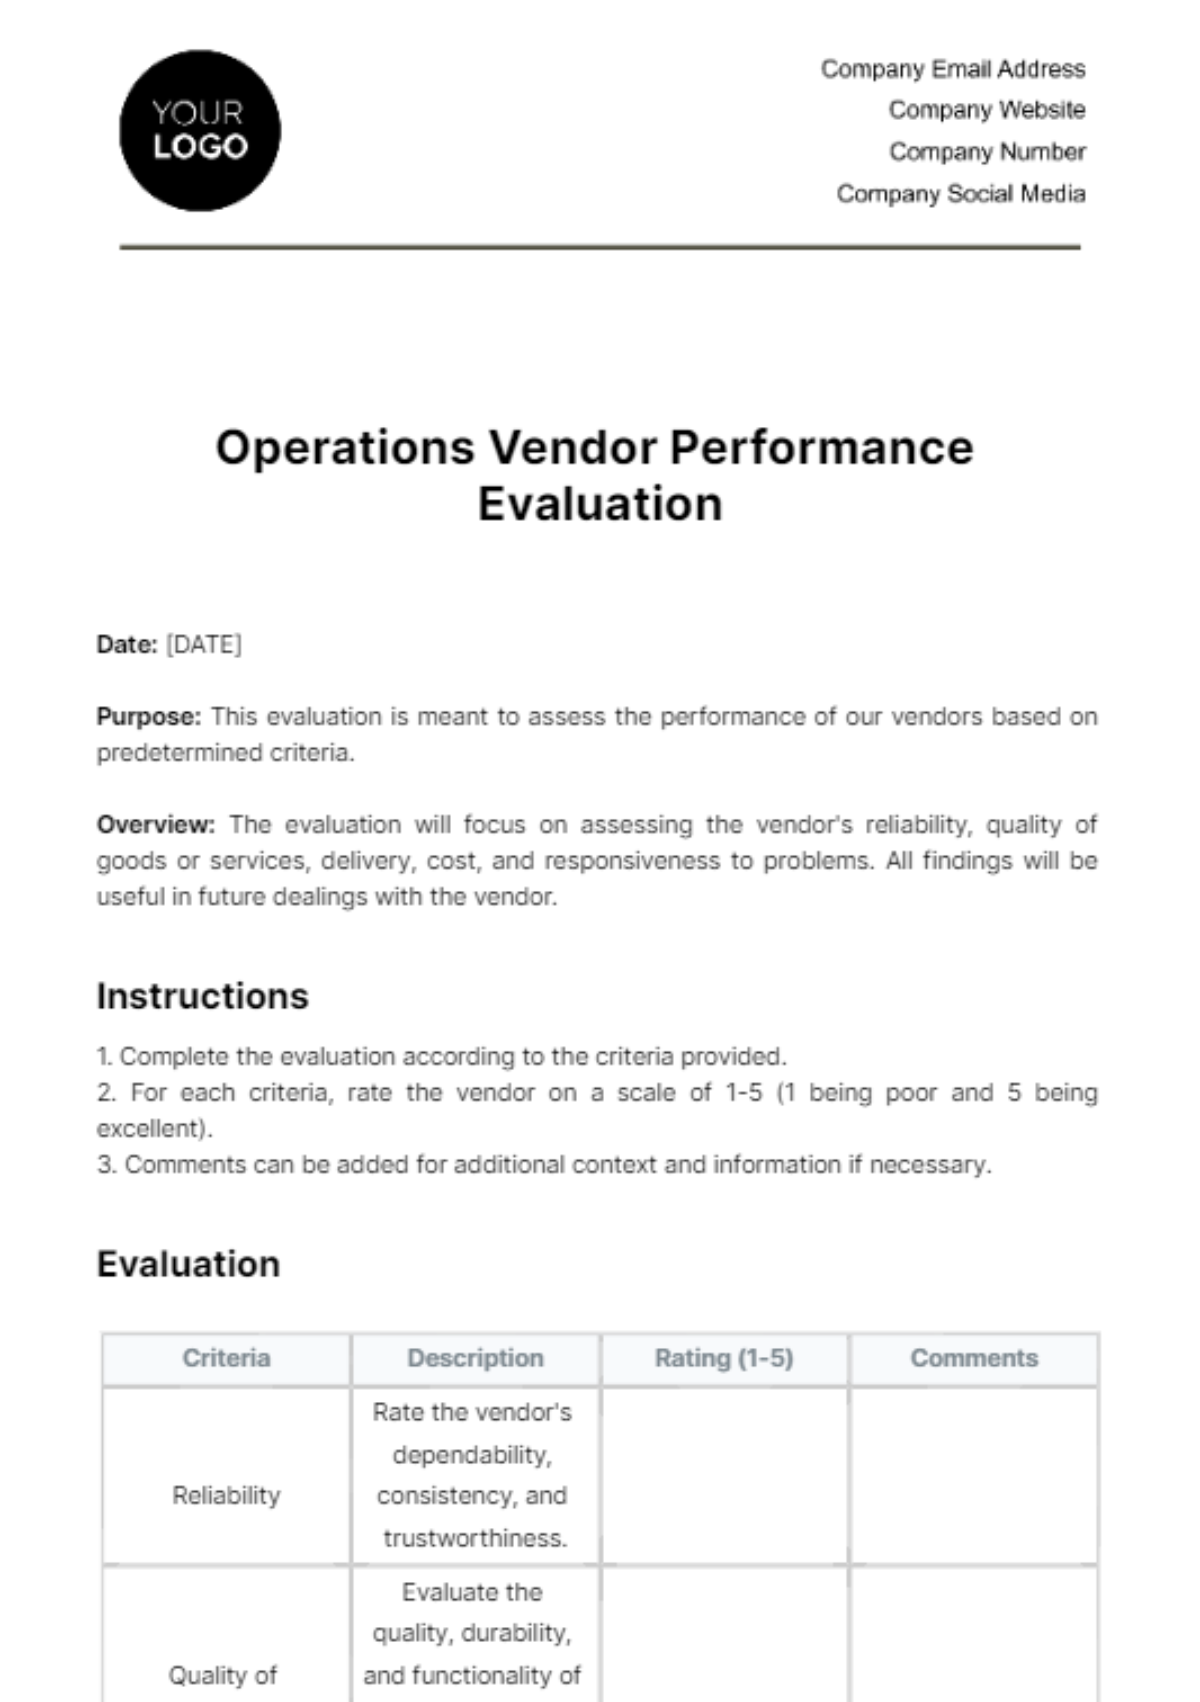 Free Operations Vendor Performance Evaluation Template